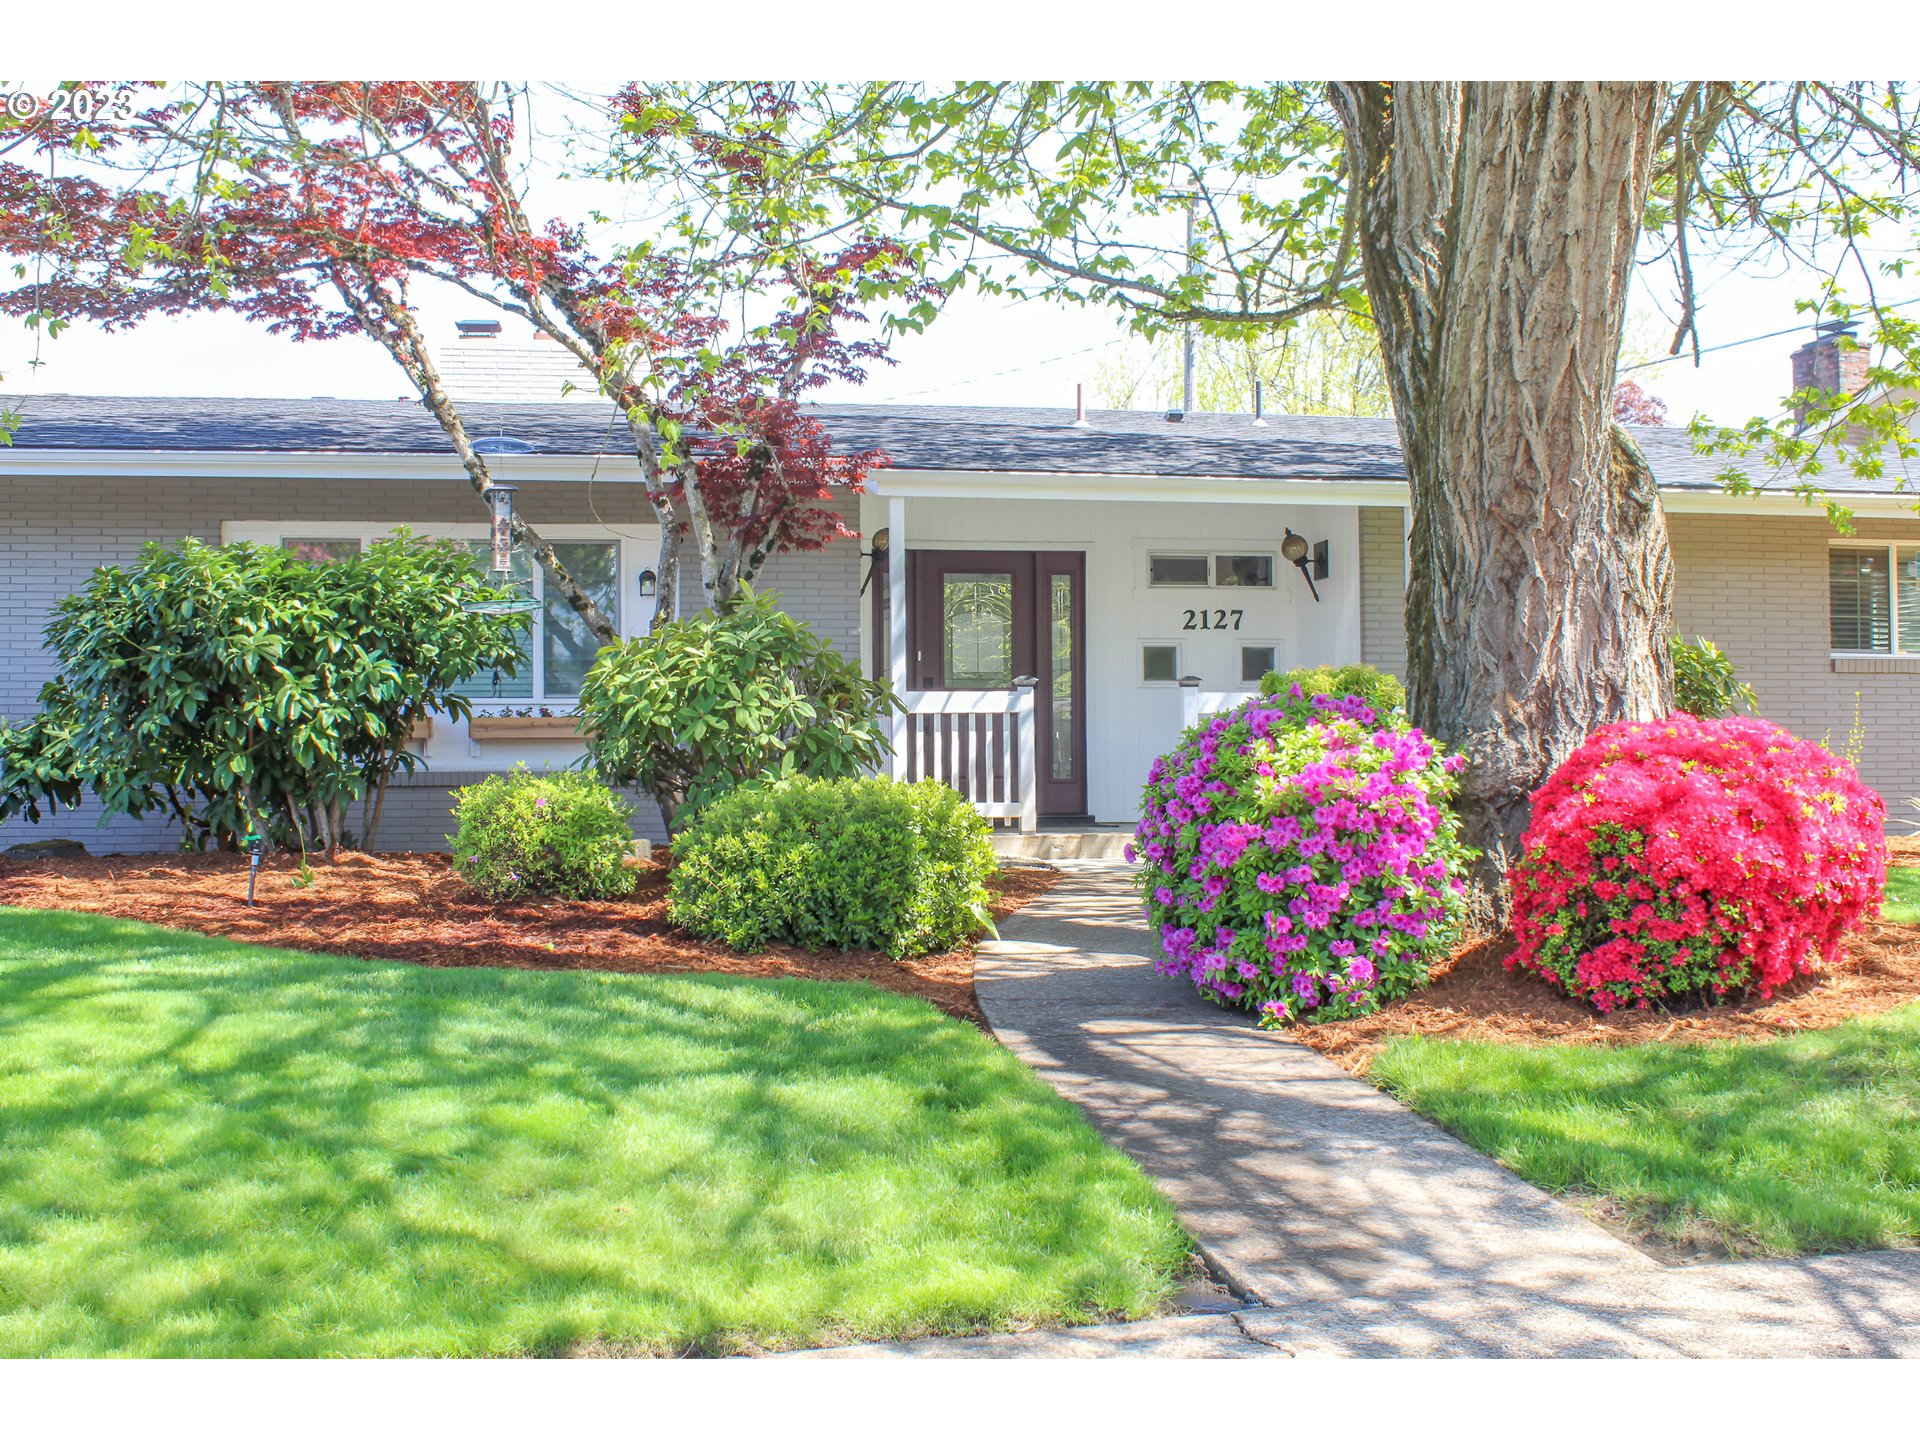 2127 SILVER LEA CT Eugene Home Listings - Galand Haas Real Estate